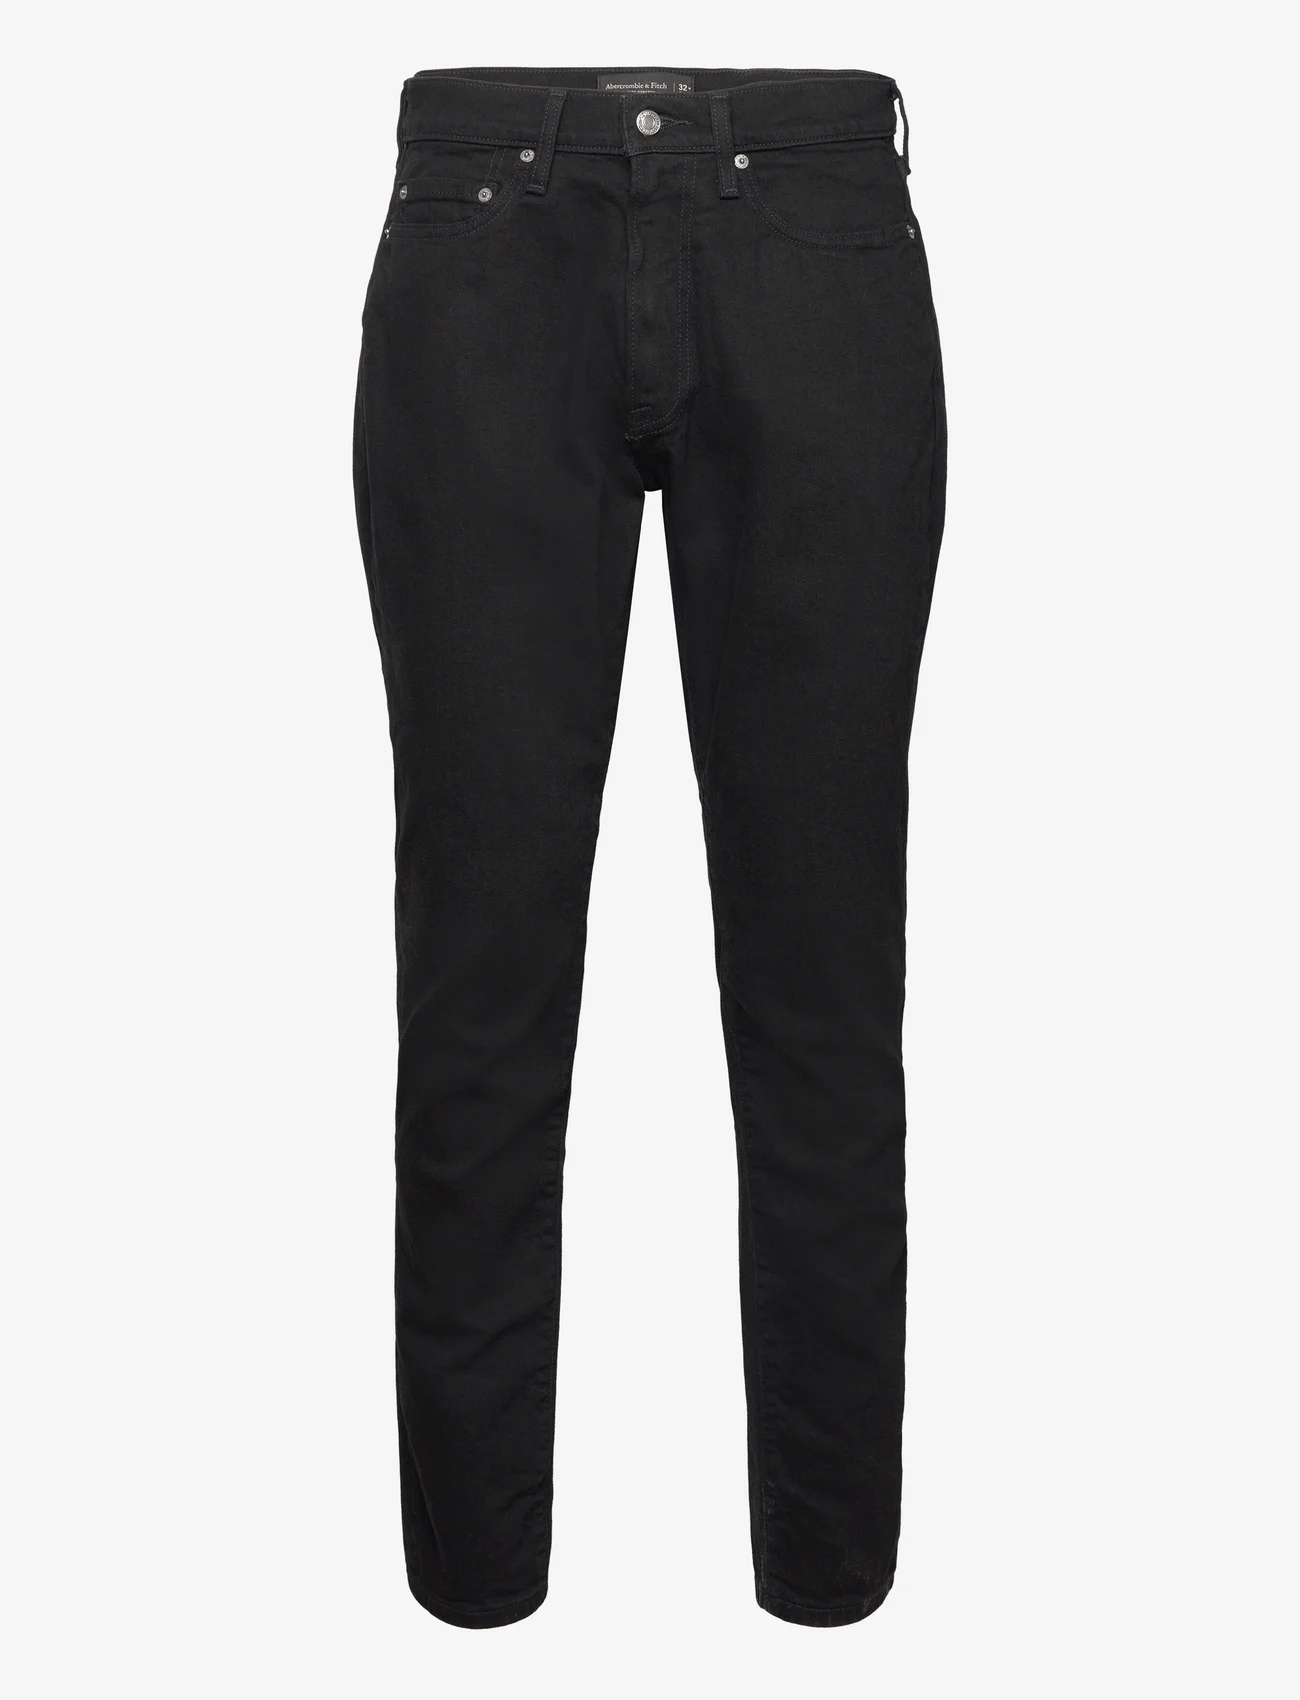 Abercrombie & Fitch - ANF MENS JEANS - slim jeans - ablack196 - saturated black wash - 0